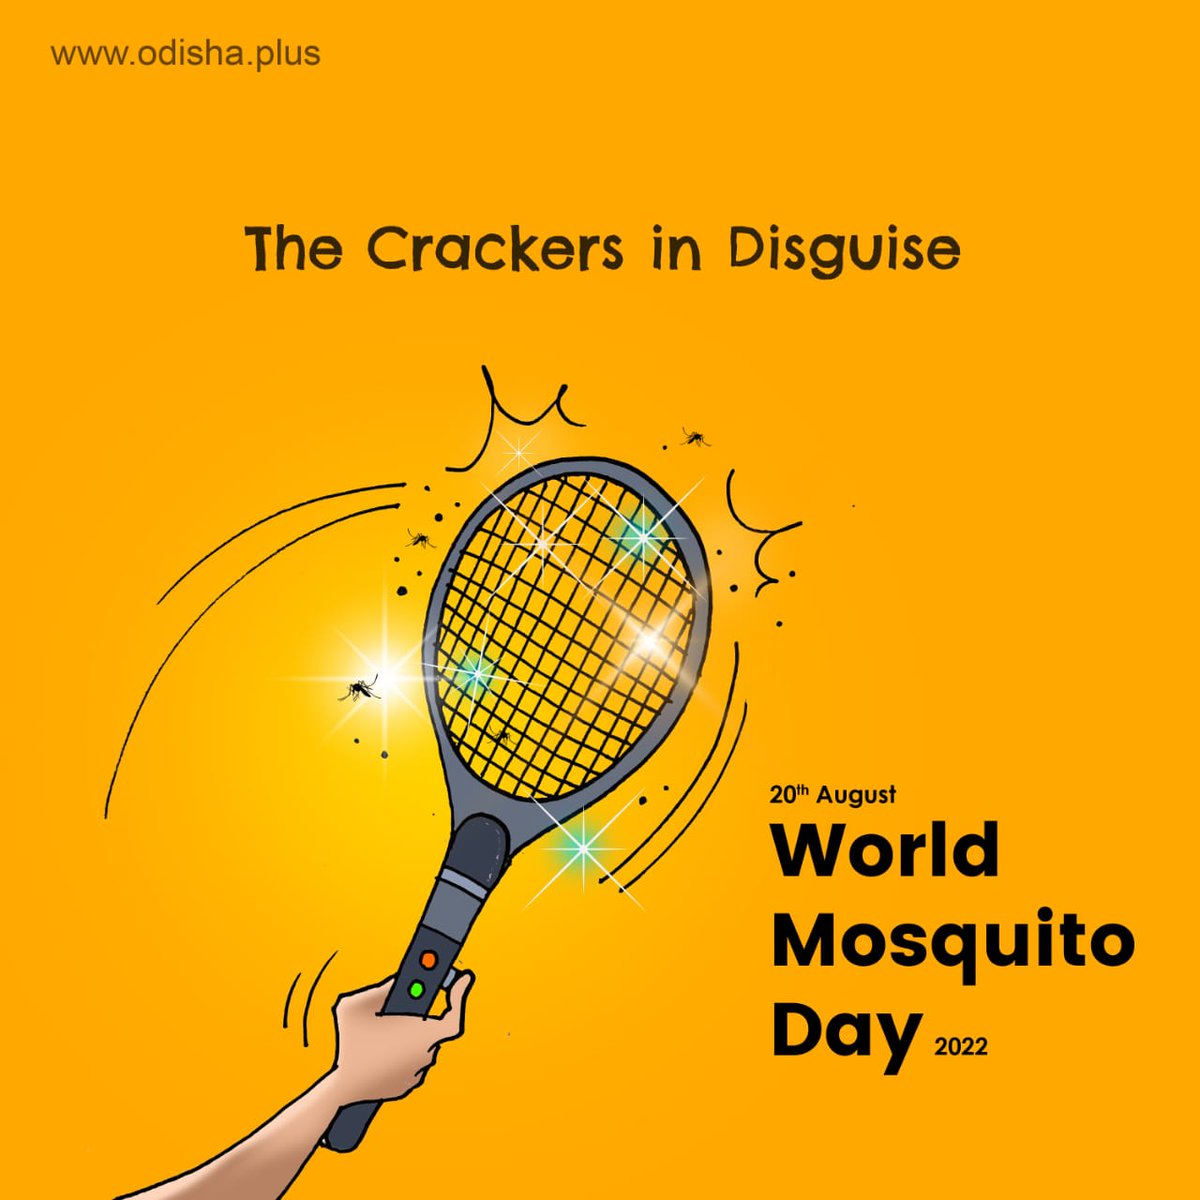 Stay Safe with a Wave, Protect yourself from #MosquitoBites. #WorldMosquitoDay2022

#mosquitoeducation #Mosquitoday #Malariaawareness #Dengueawareness #MosquitoDay2022  #malariamustdie #StopDengue  #mosquitokiller #StopMalaria